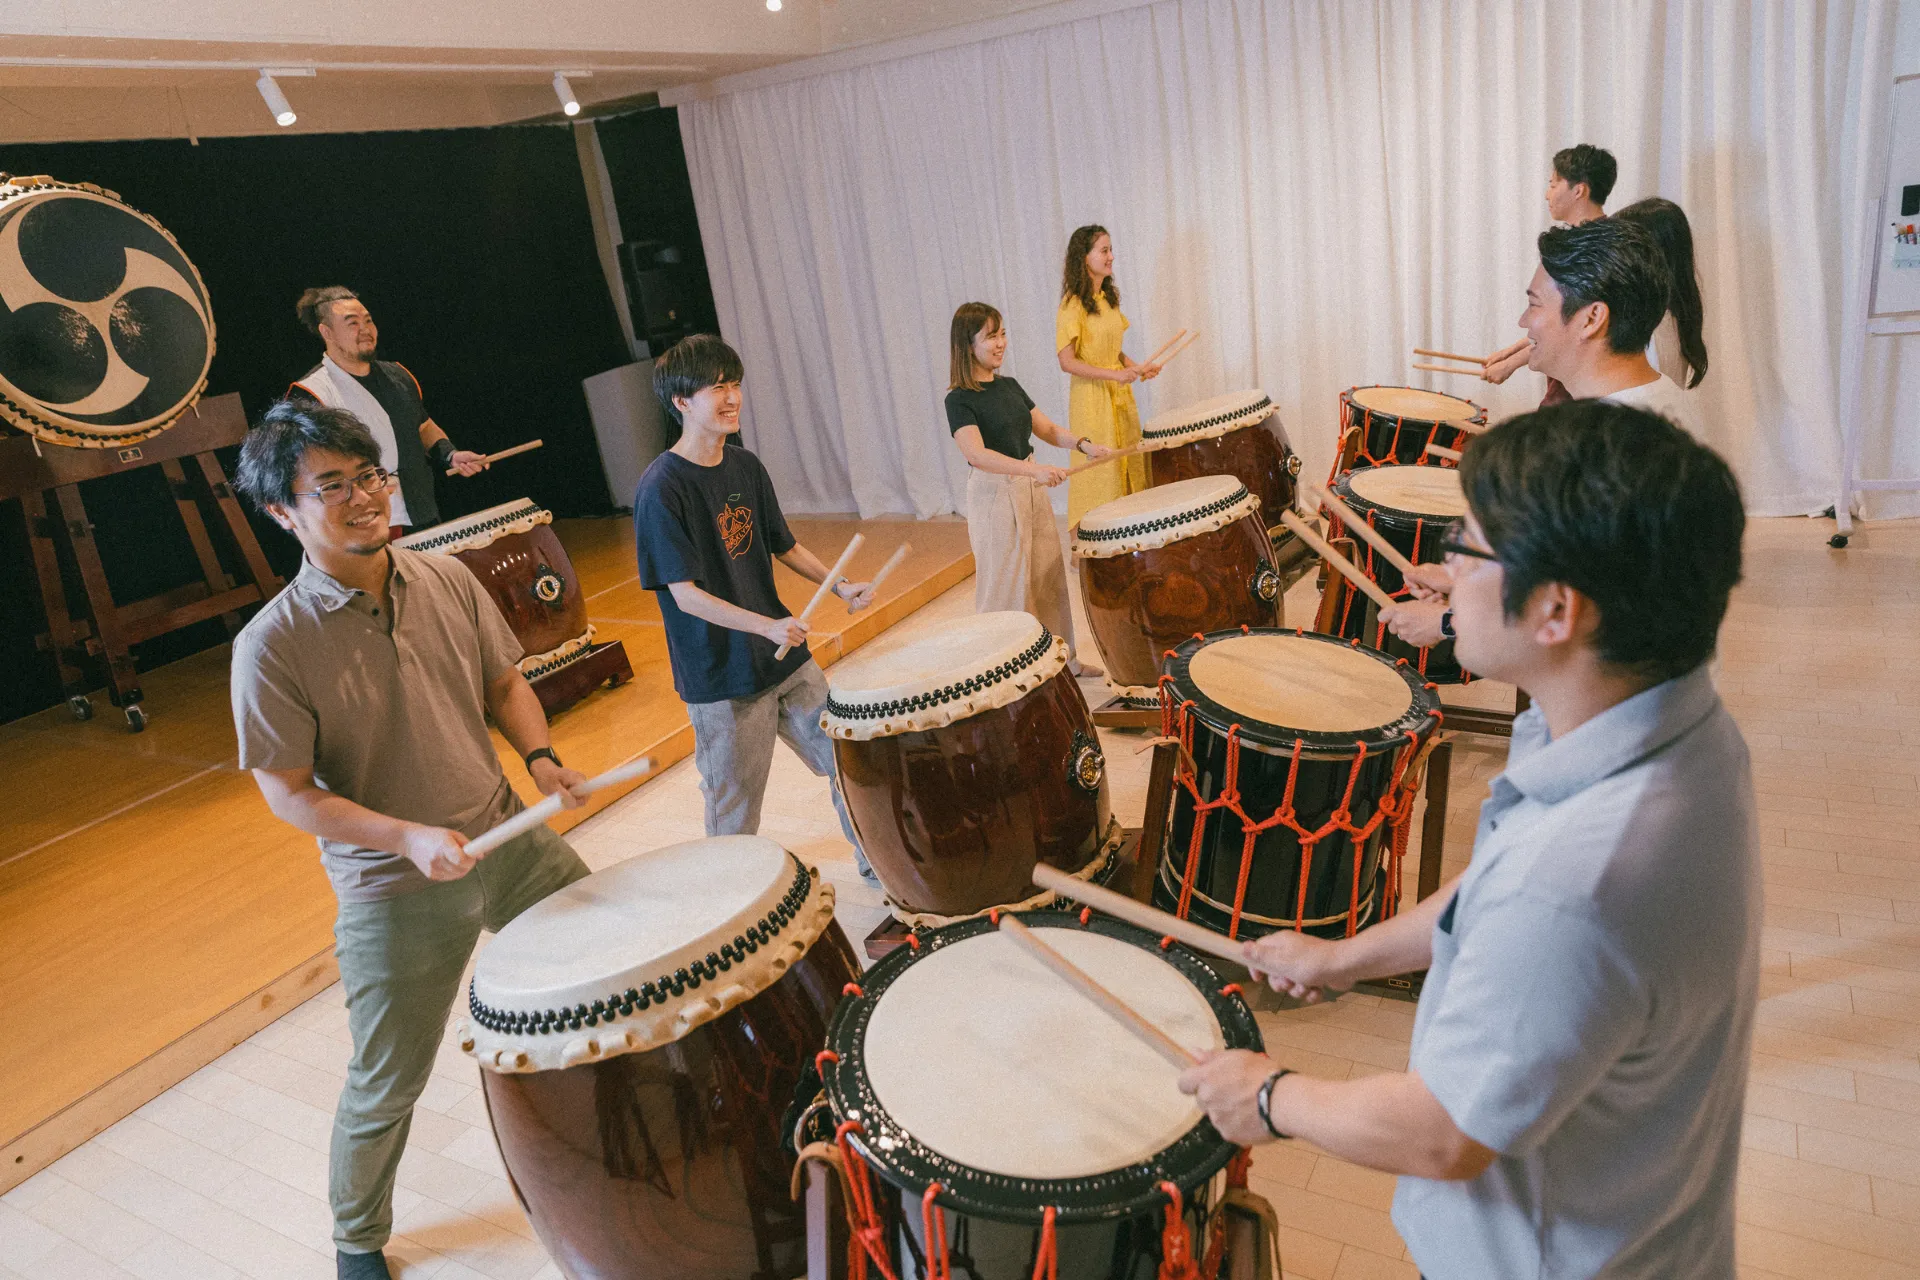 Japanese drum "TAIKO" workshop is a team-building activity that everyone can enjoy together using taiko drums.